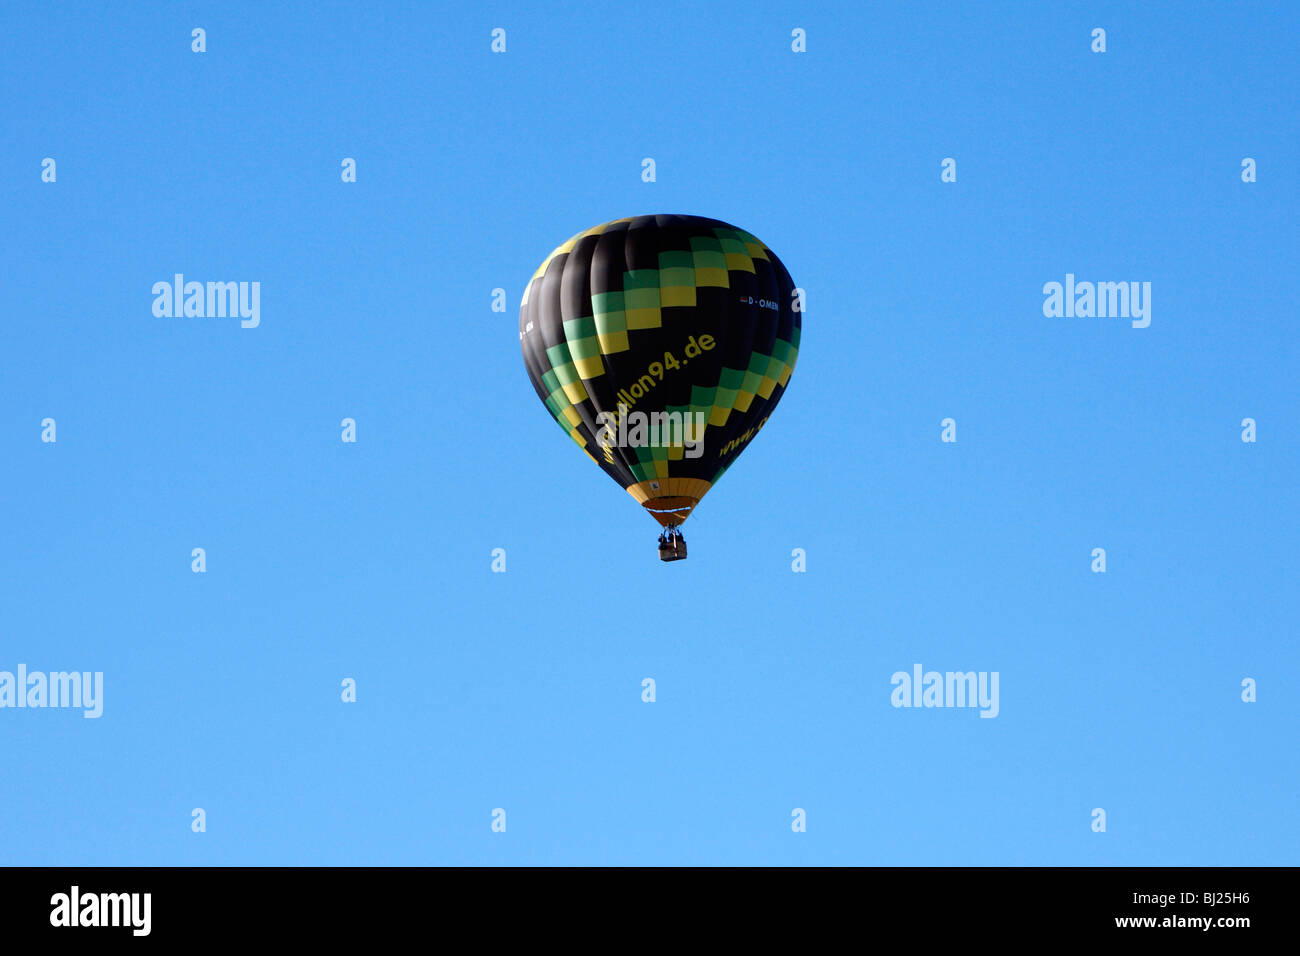 Hot air ballon, flying in winter, Harz mountains, Germany Stock Photo